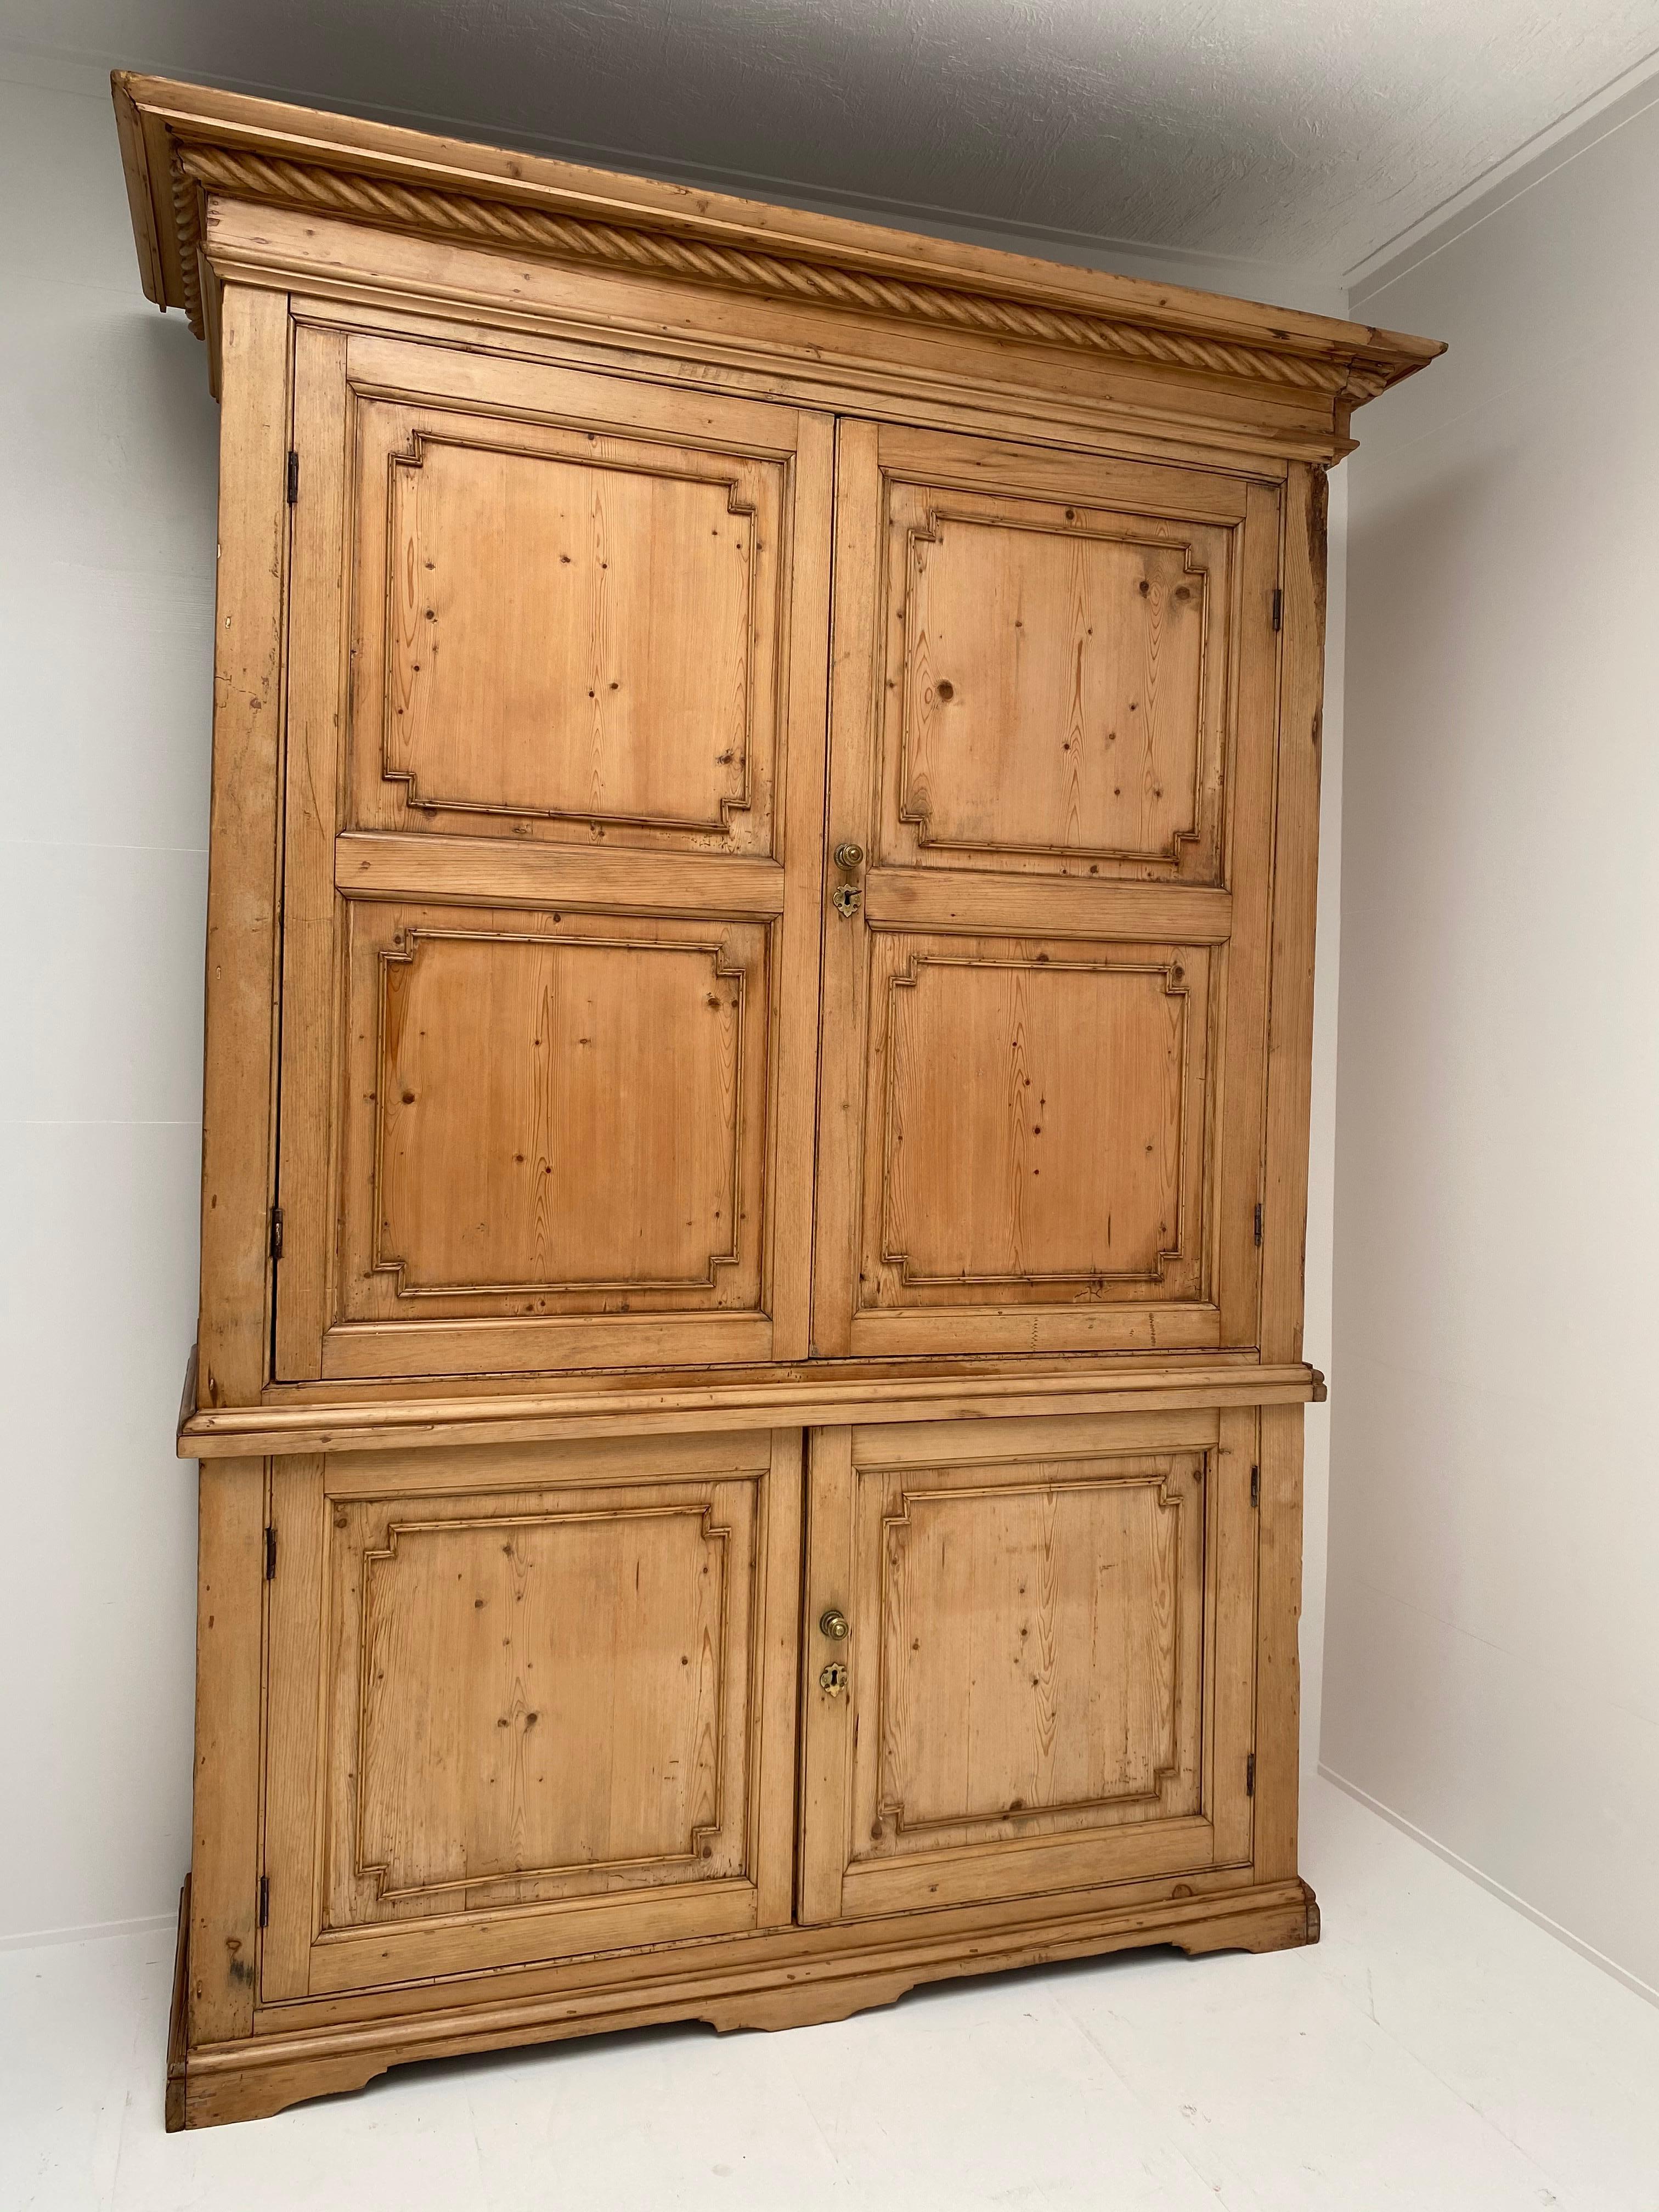 Polished Beautiful Cupboard from Scotland For Sale